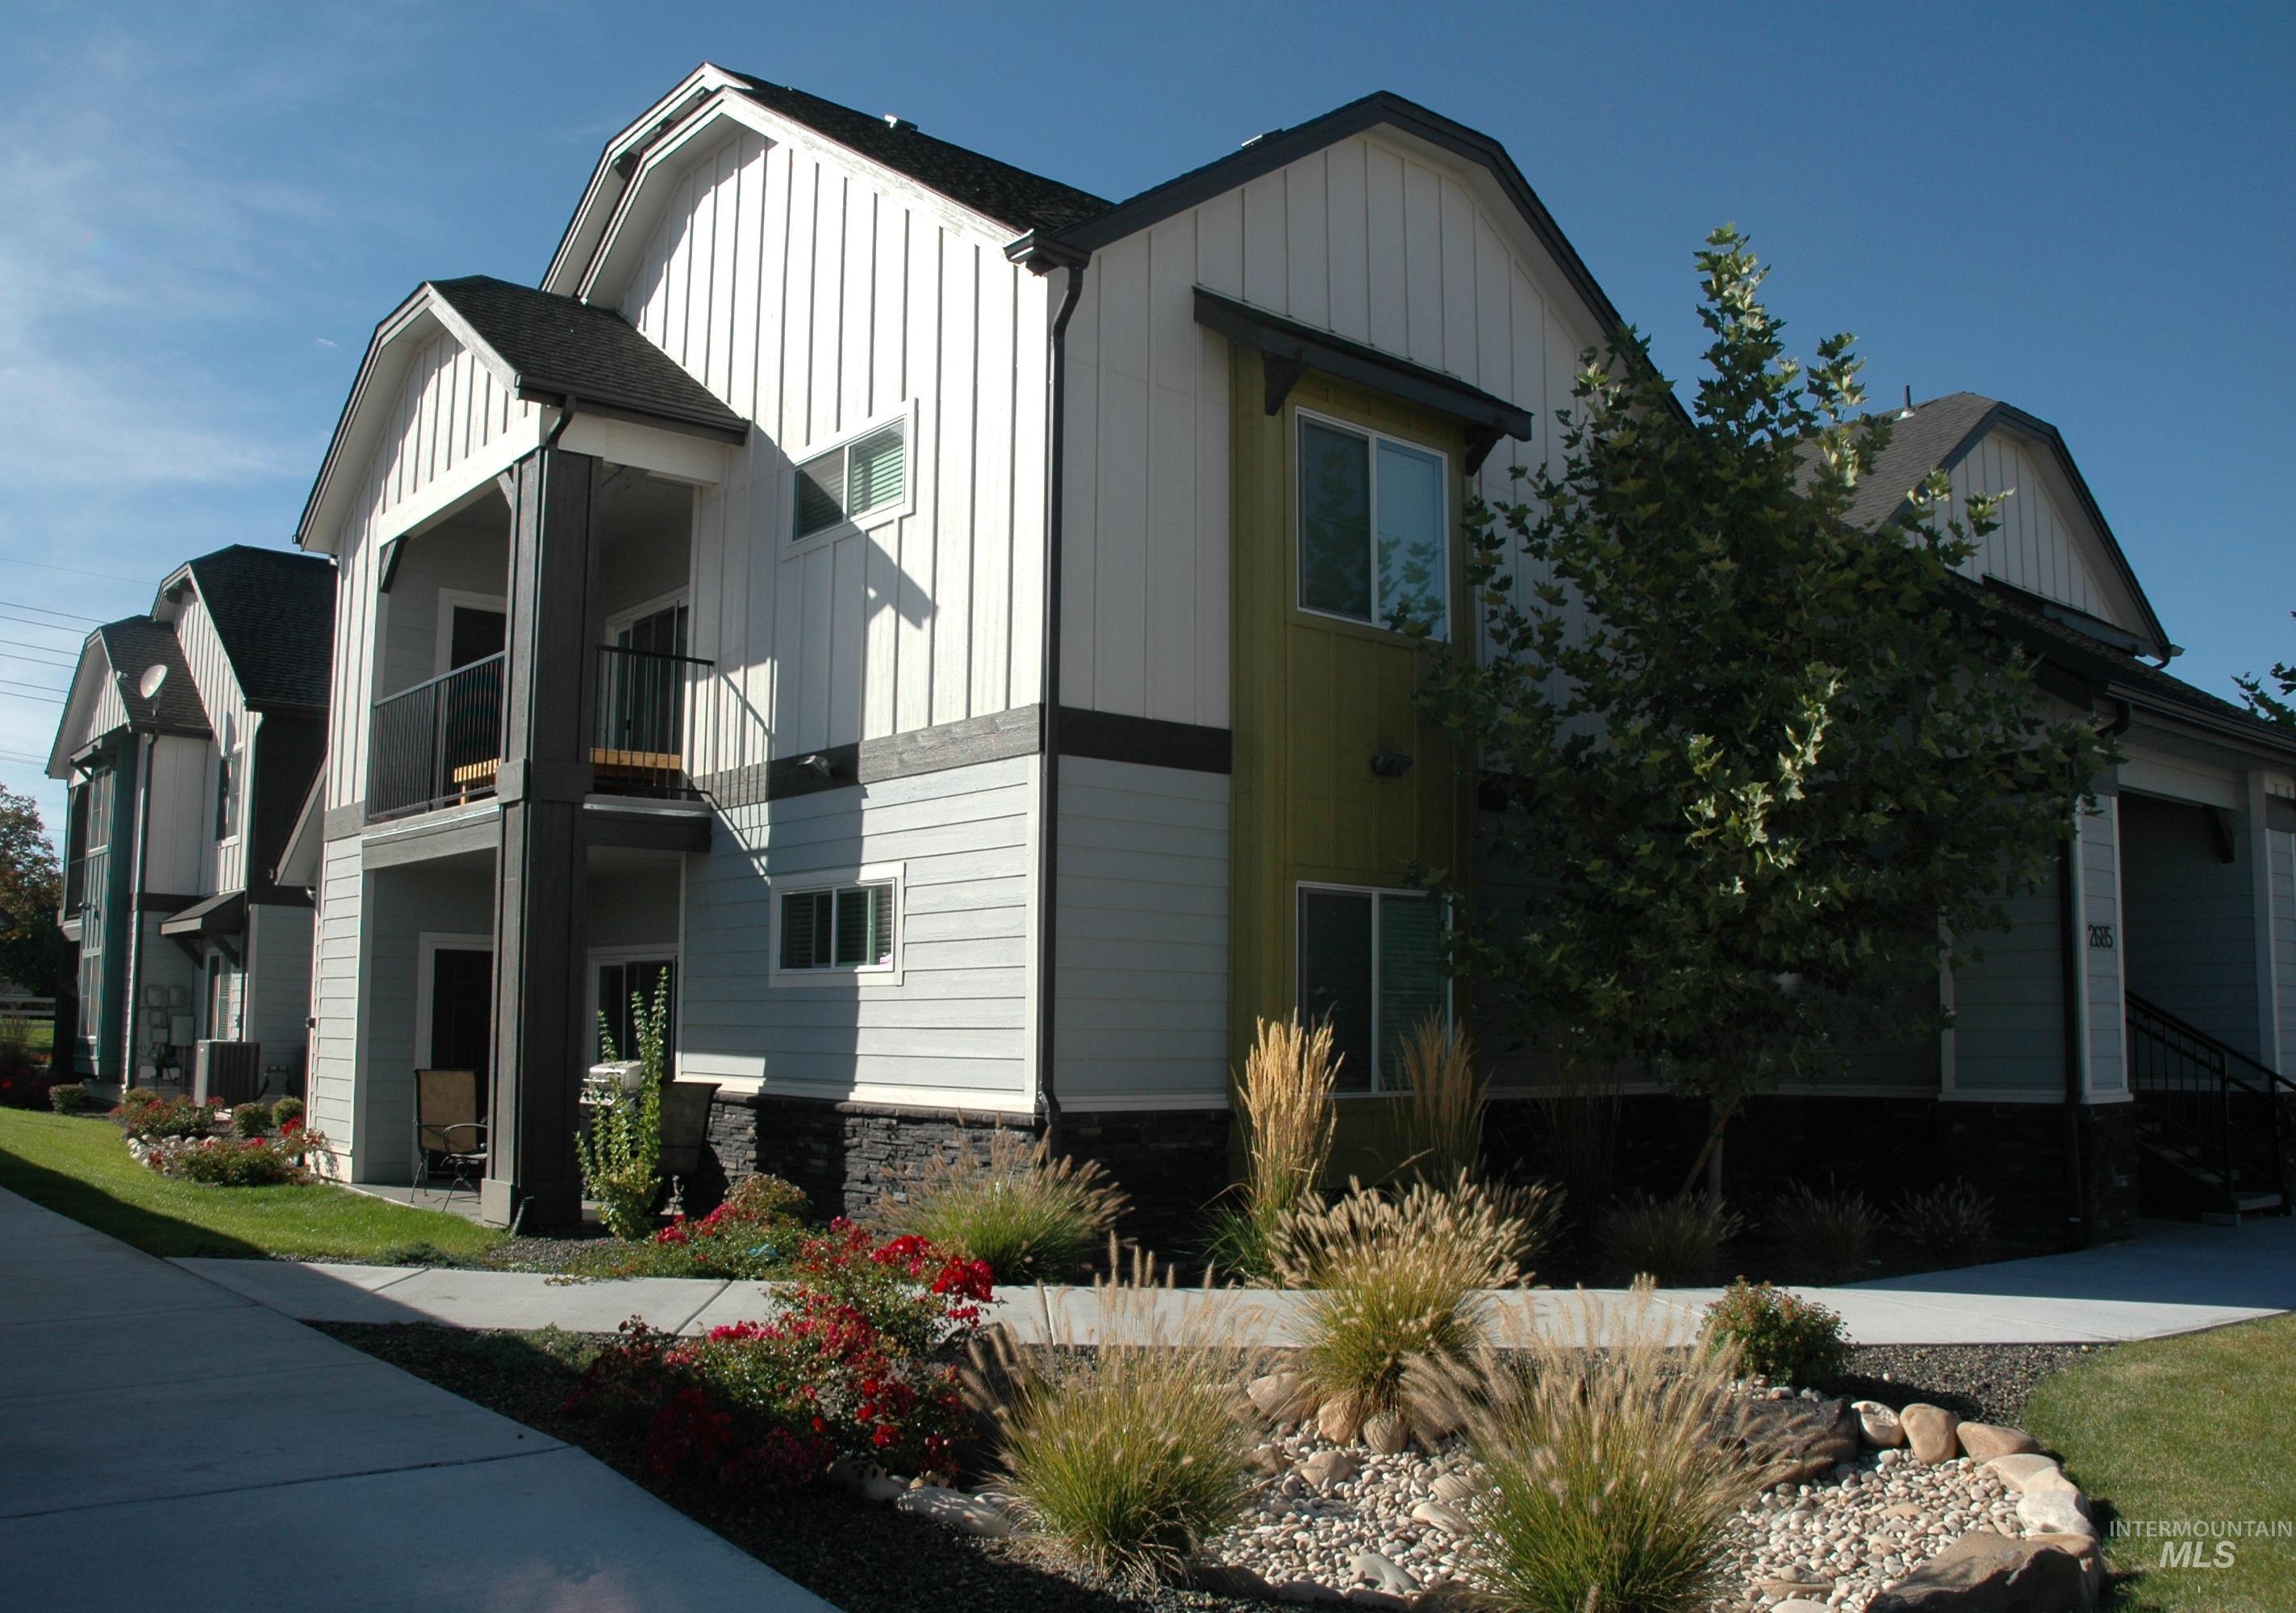 2685 Fastwater Ave. #101, Boise, Idaho 83713-6651, 3 Bedrooms, 2 Bathrooms, Rental For Rent, Price $1,695,MLS 98902492